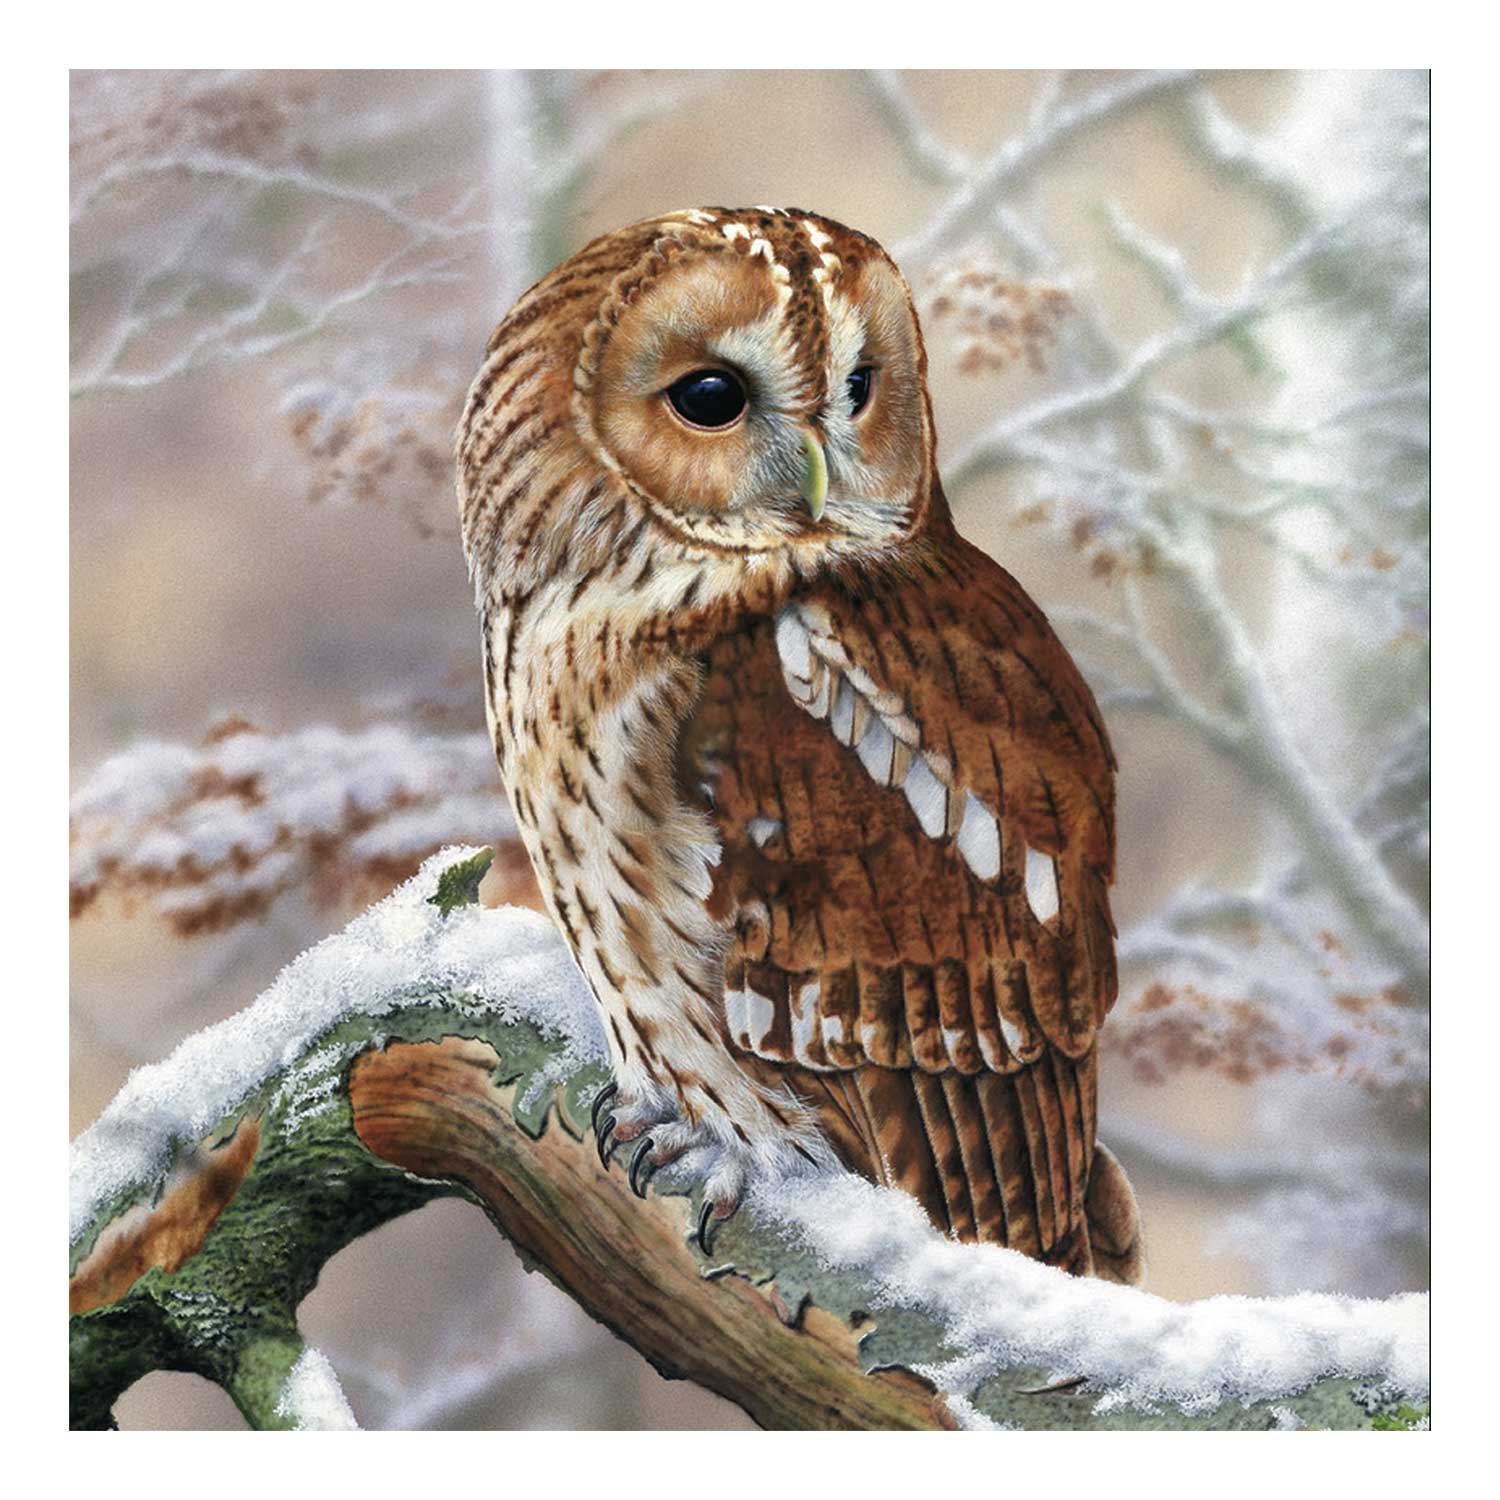 Full of wisdom RSPB charity Christmas cards - 10 pack product photo